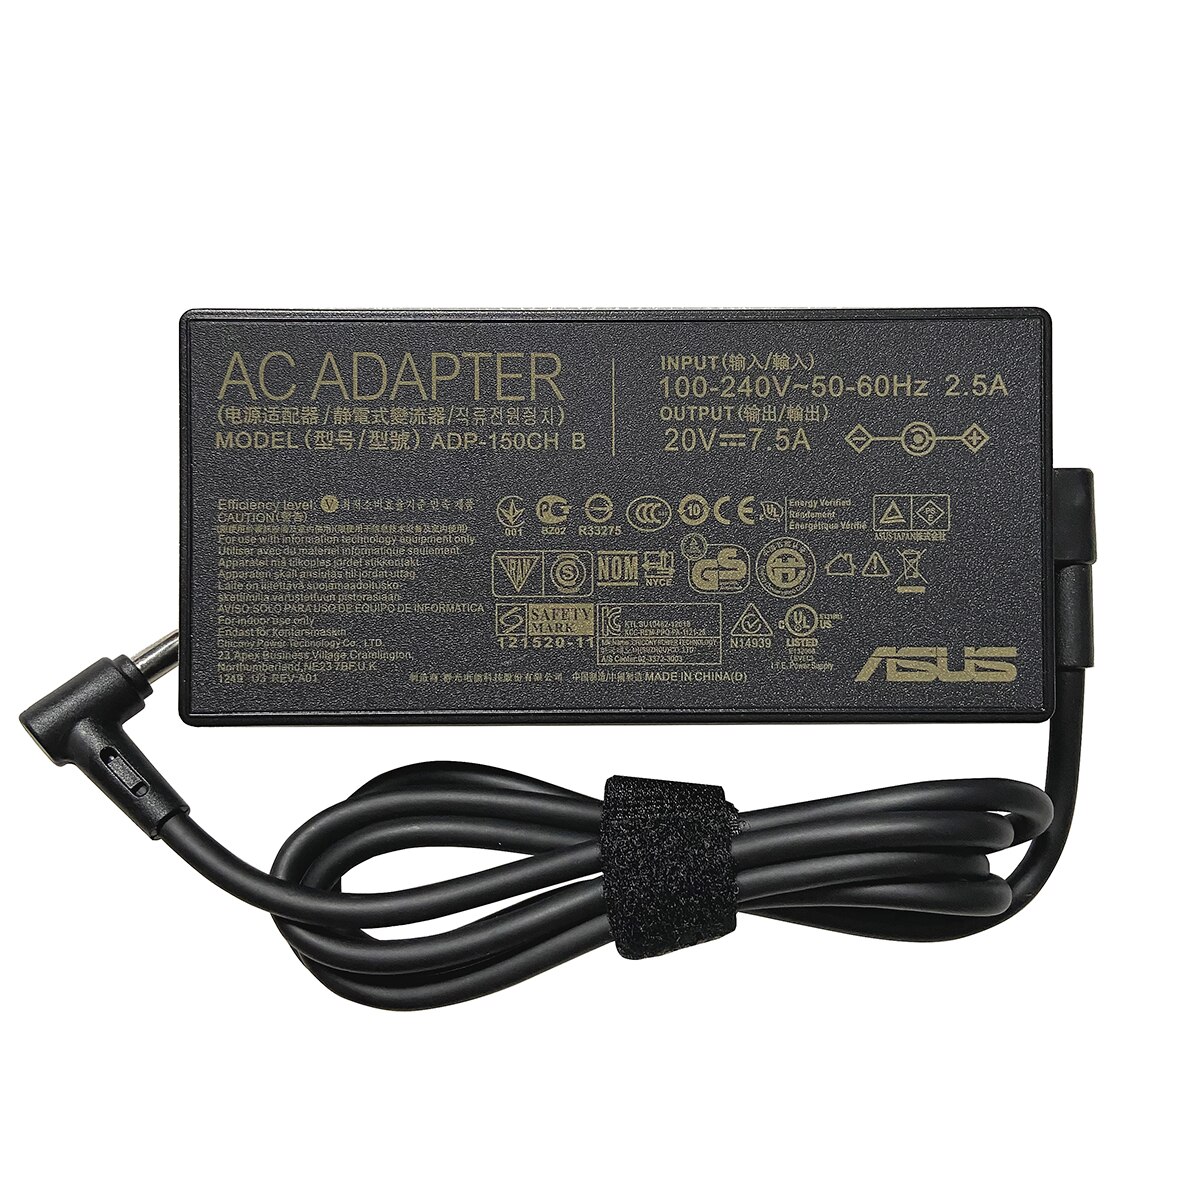   Asus 6.0x3.7, 150W (20V, 7.5A) ORG ()